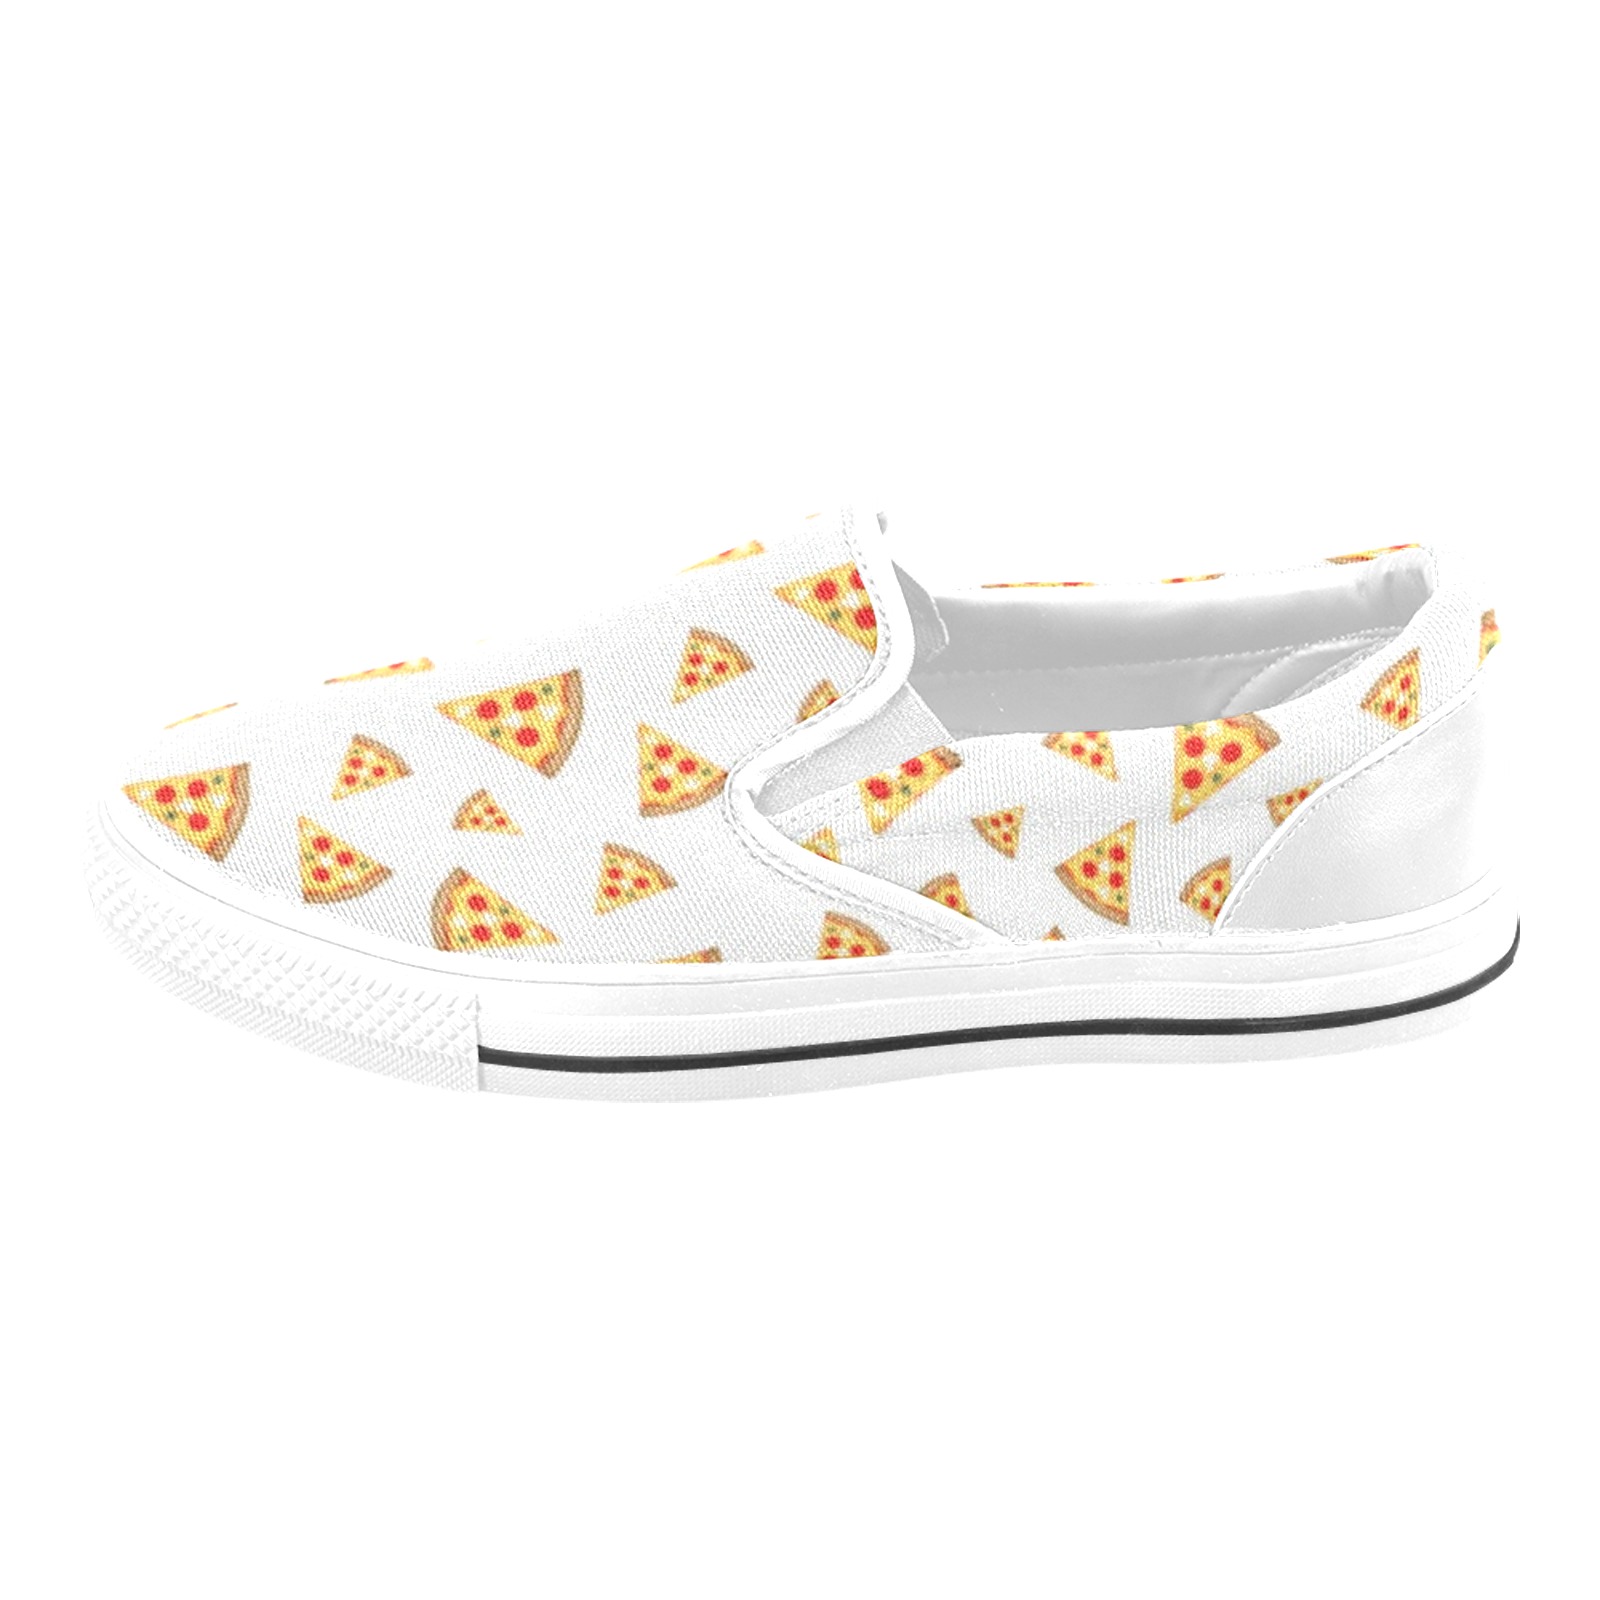 Cool and fun pizza slices pattern on white Men's Slip-on Canvas Shoes (Model 019)